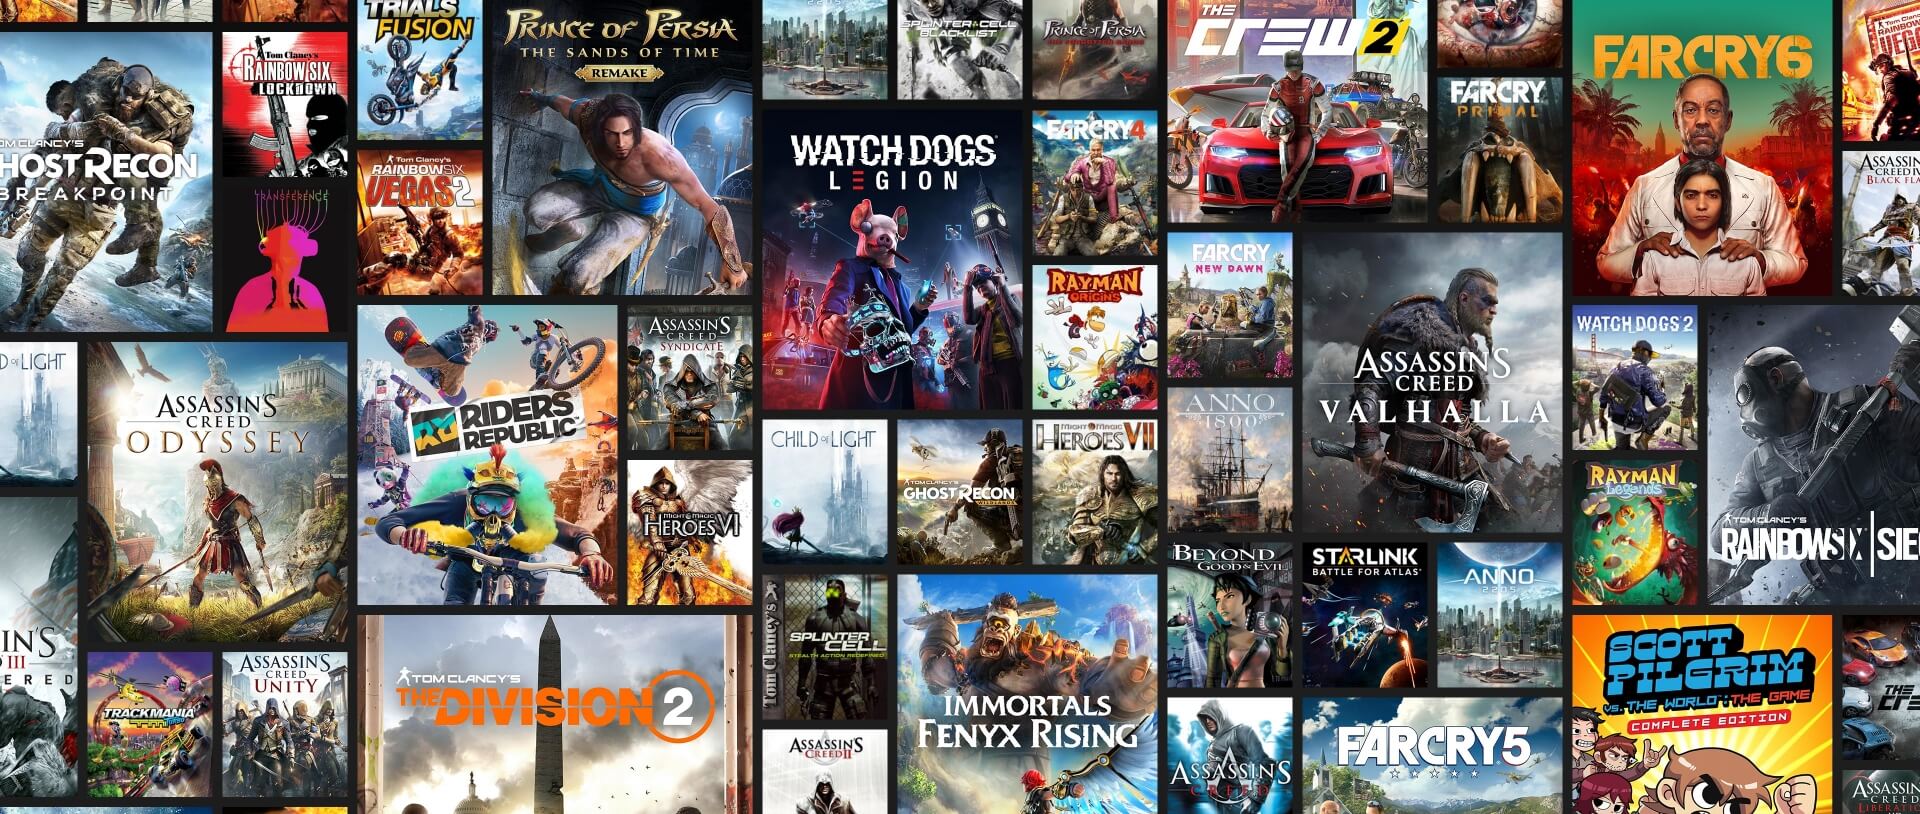 xbox live game pass library